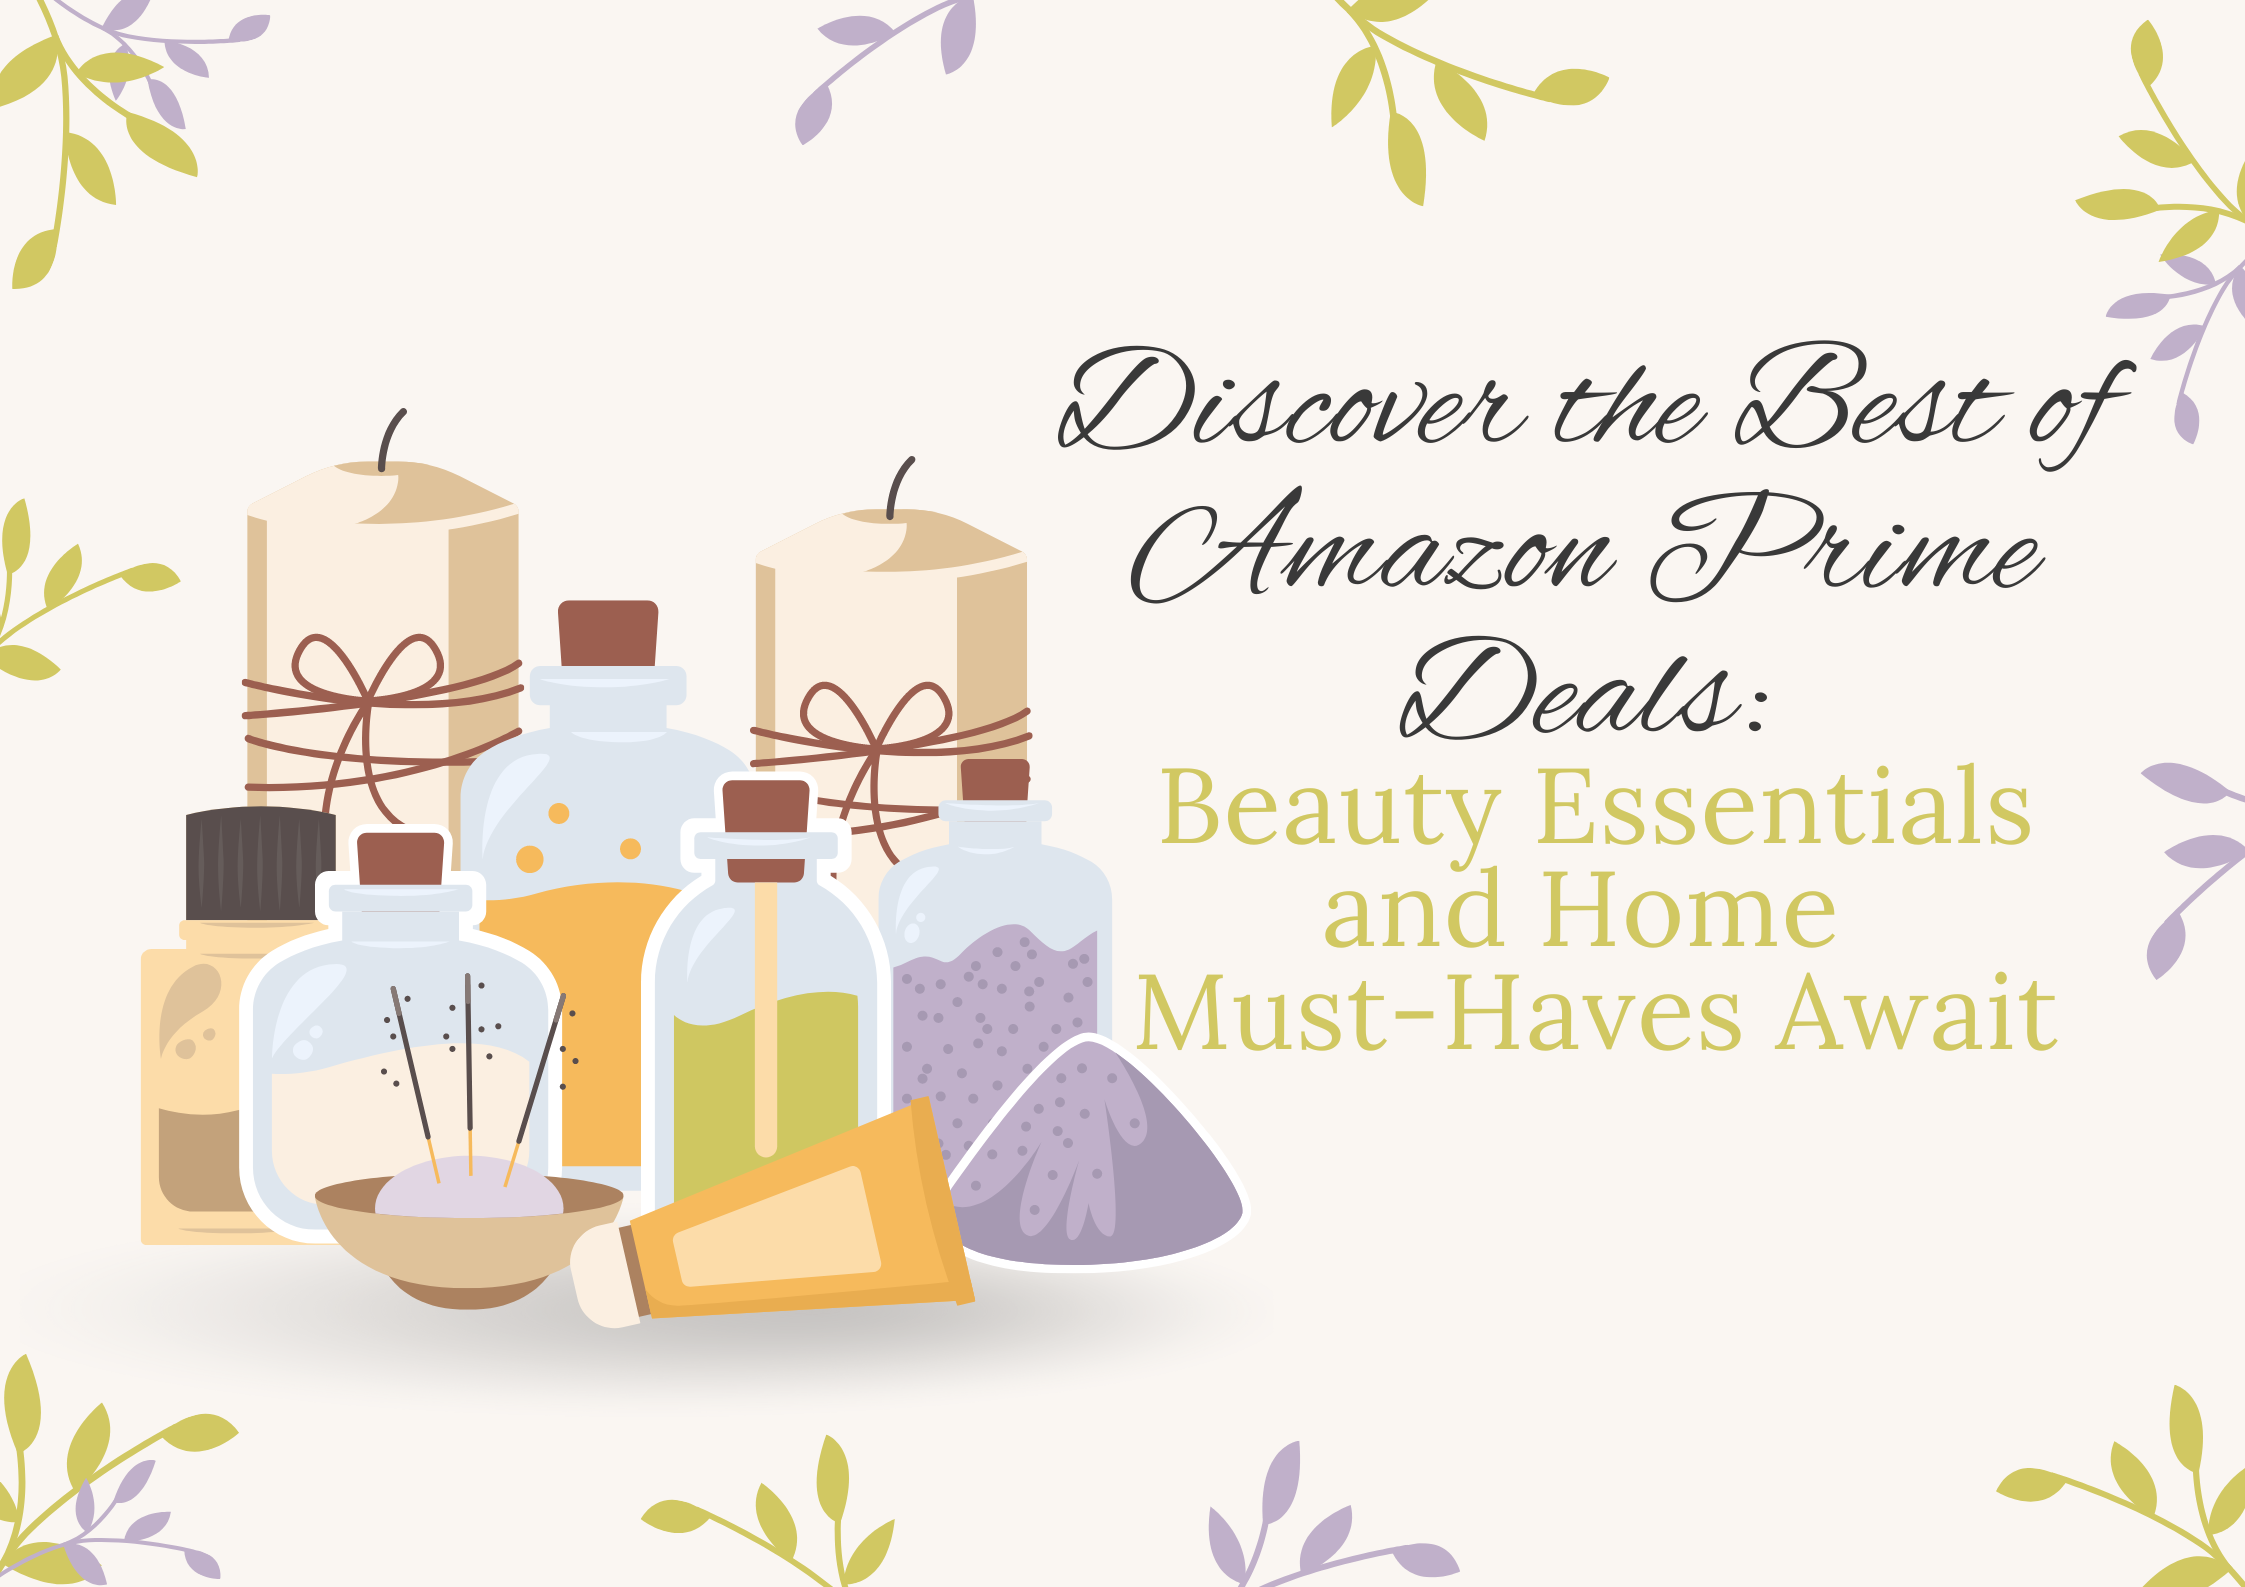 Discover the Best of Amazon Prime Deals: Beauty Essentials and Home Must-Haves Await